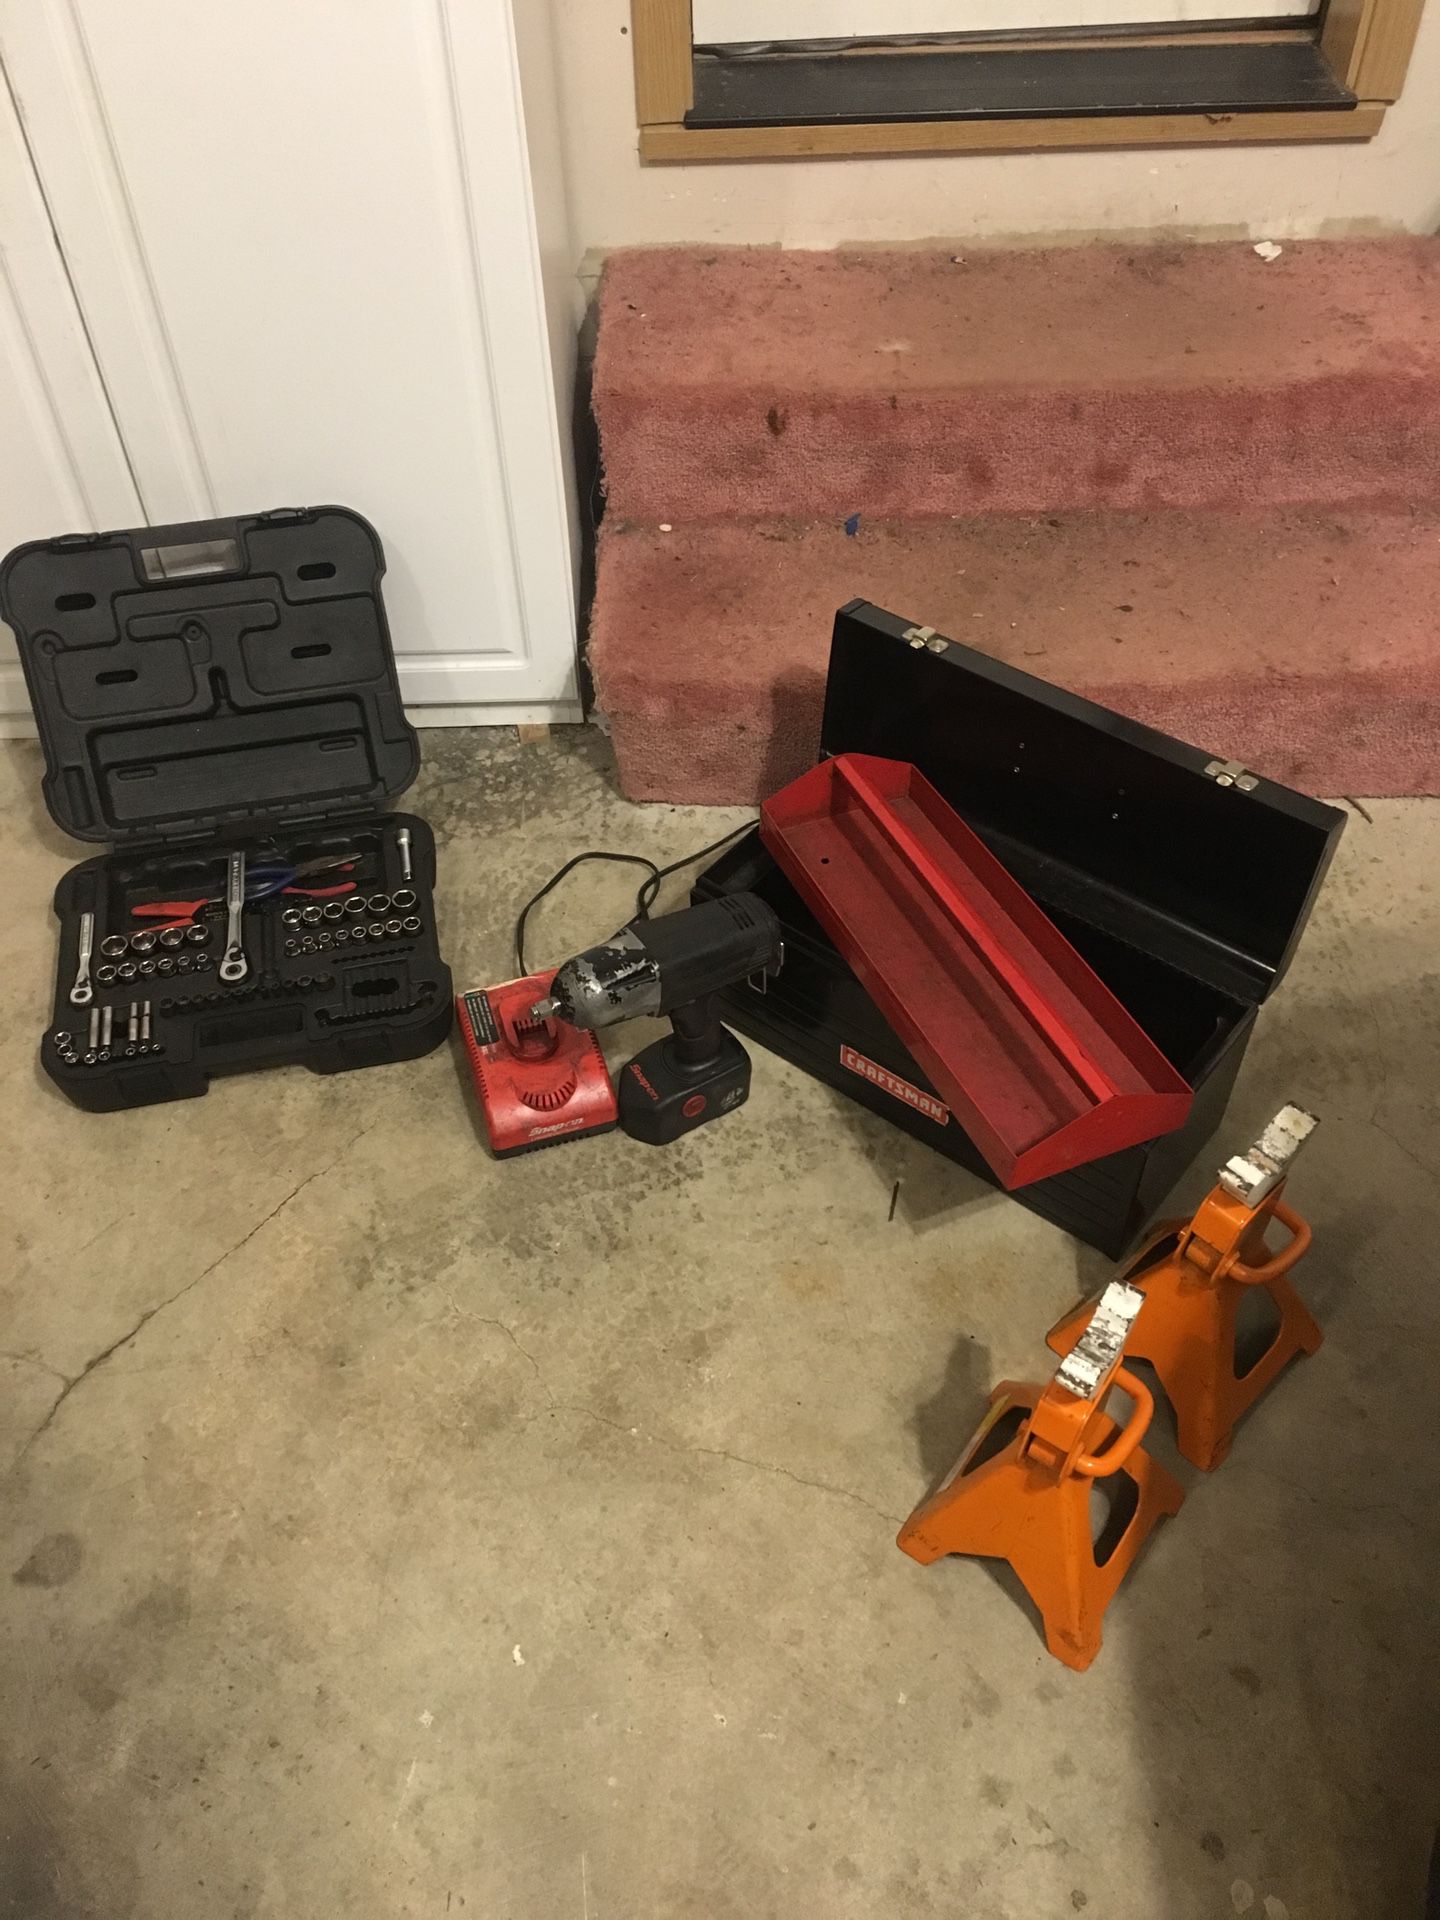 Used craftsman, snap on and other miscellaneous tools